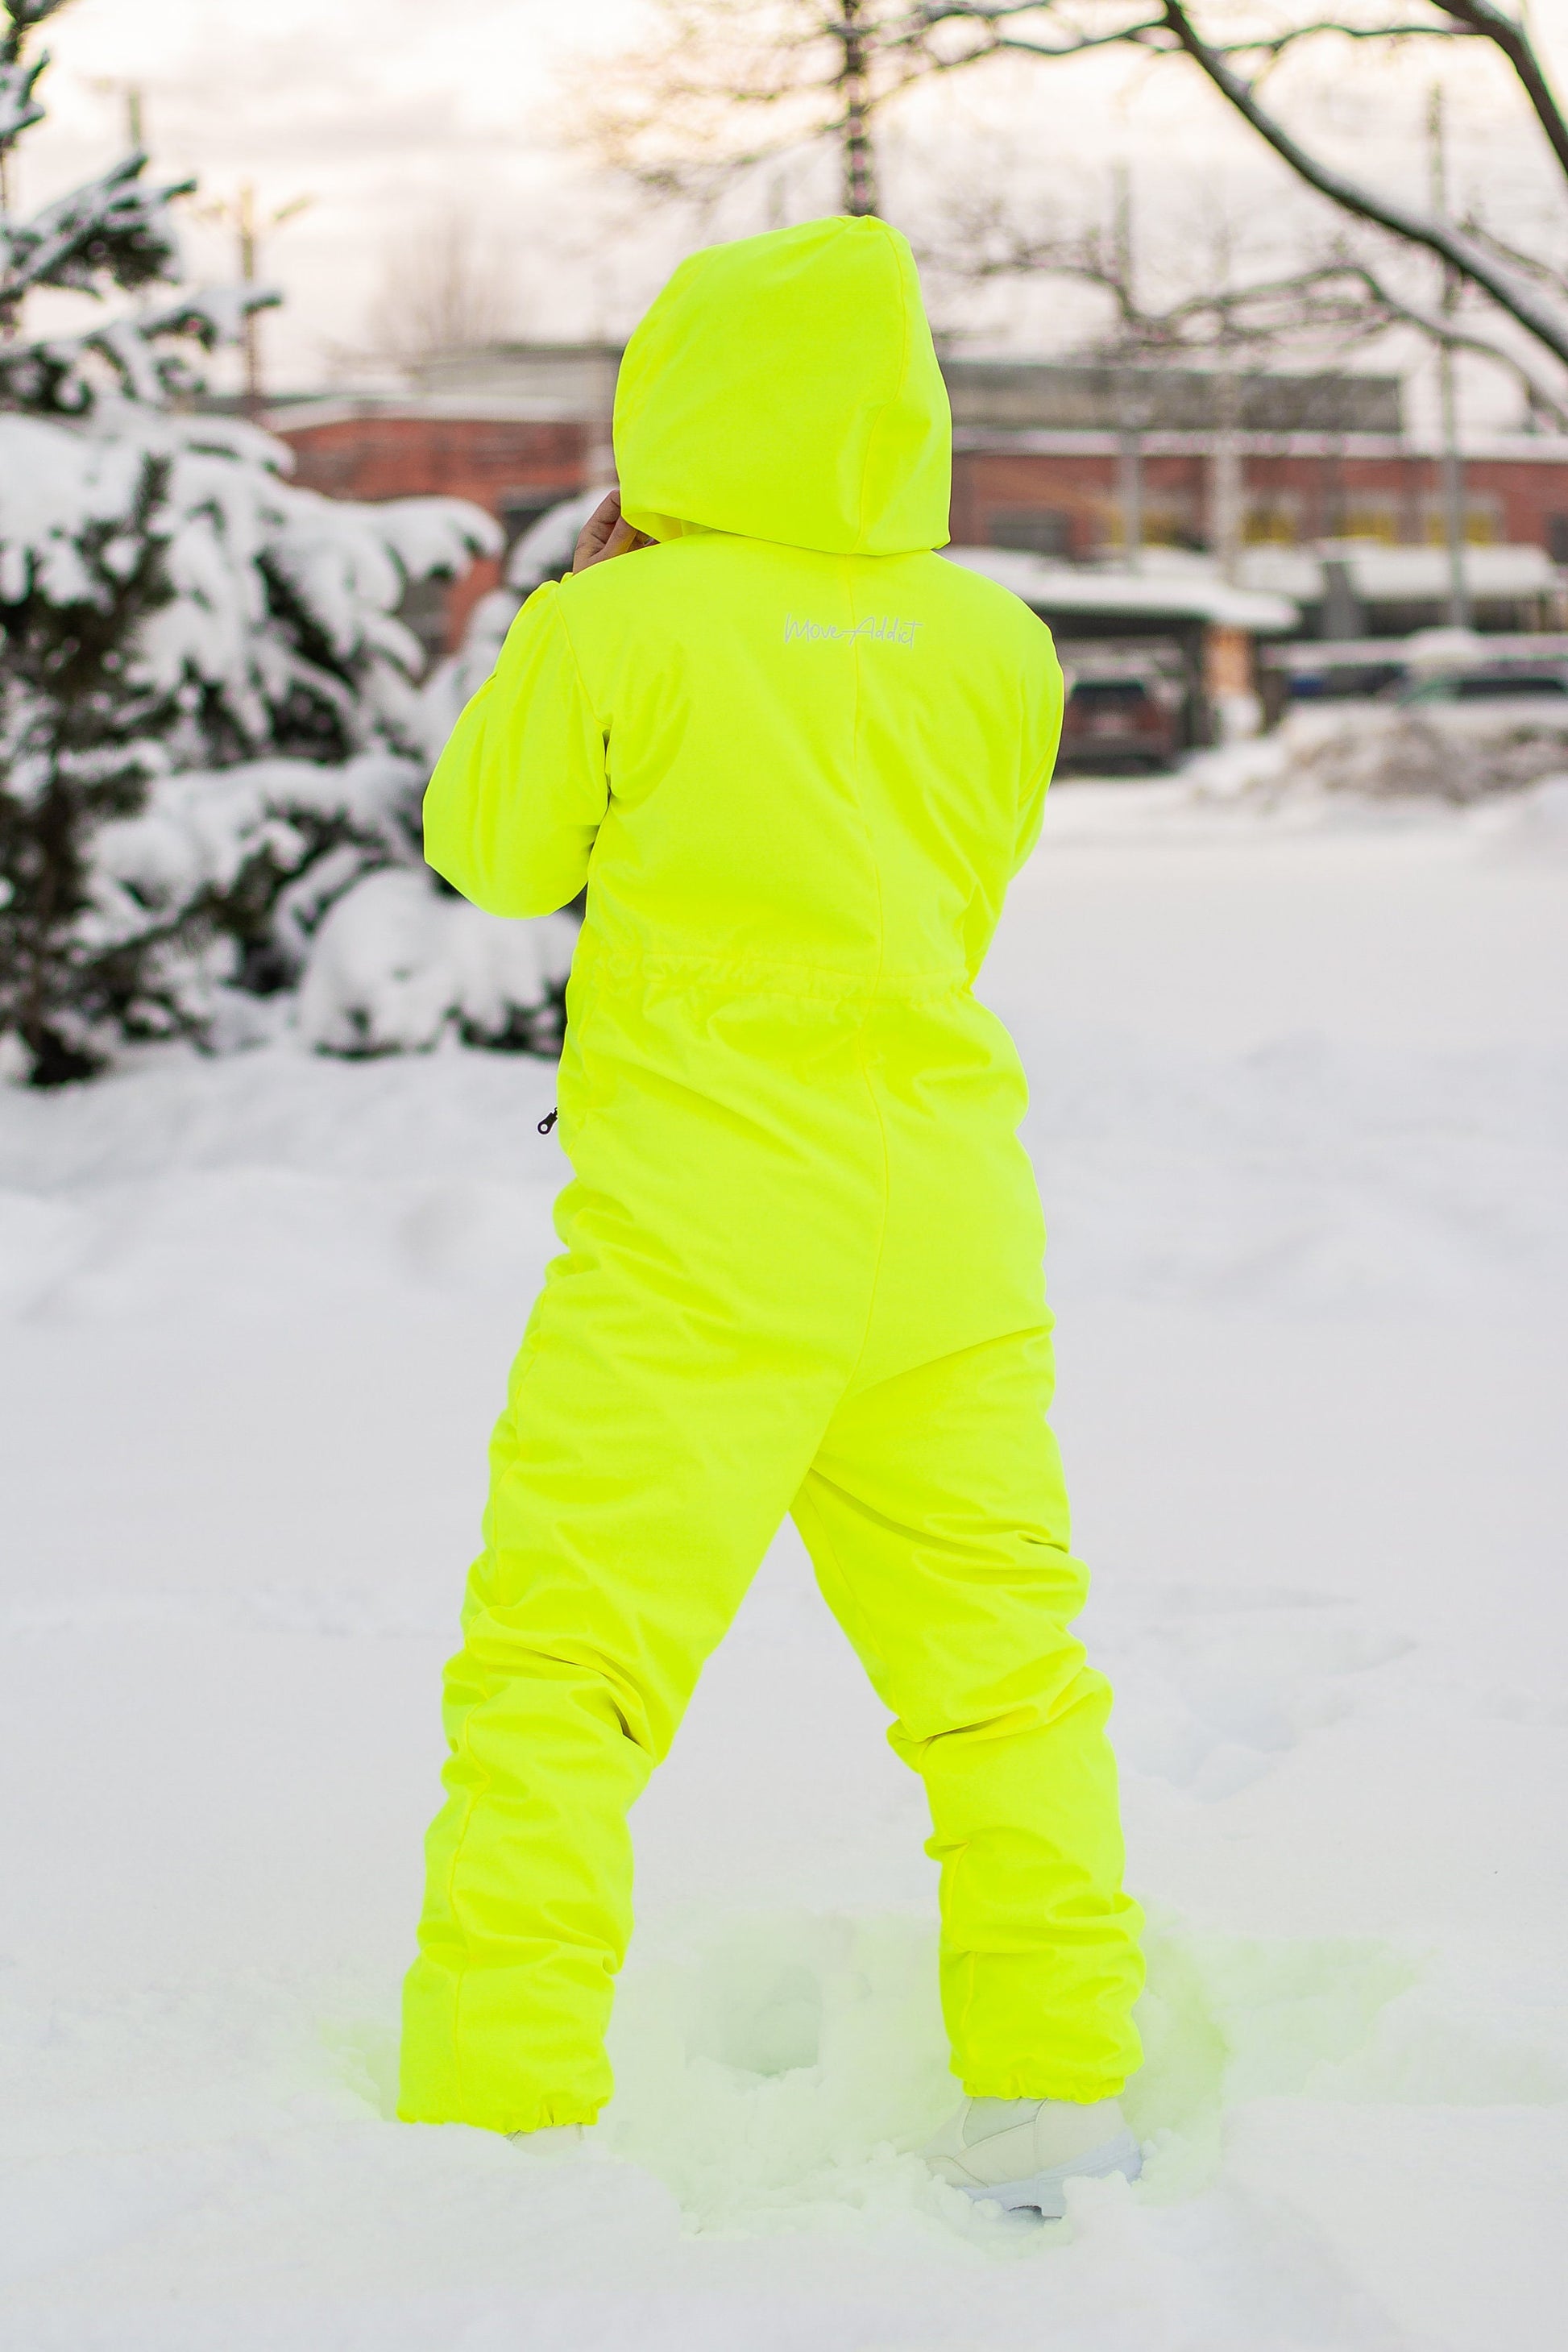 Winter Ski Jumpsuit, Snowboard Clothes, Snowboard Suit, Skiing